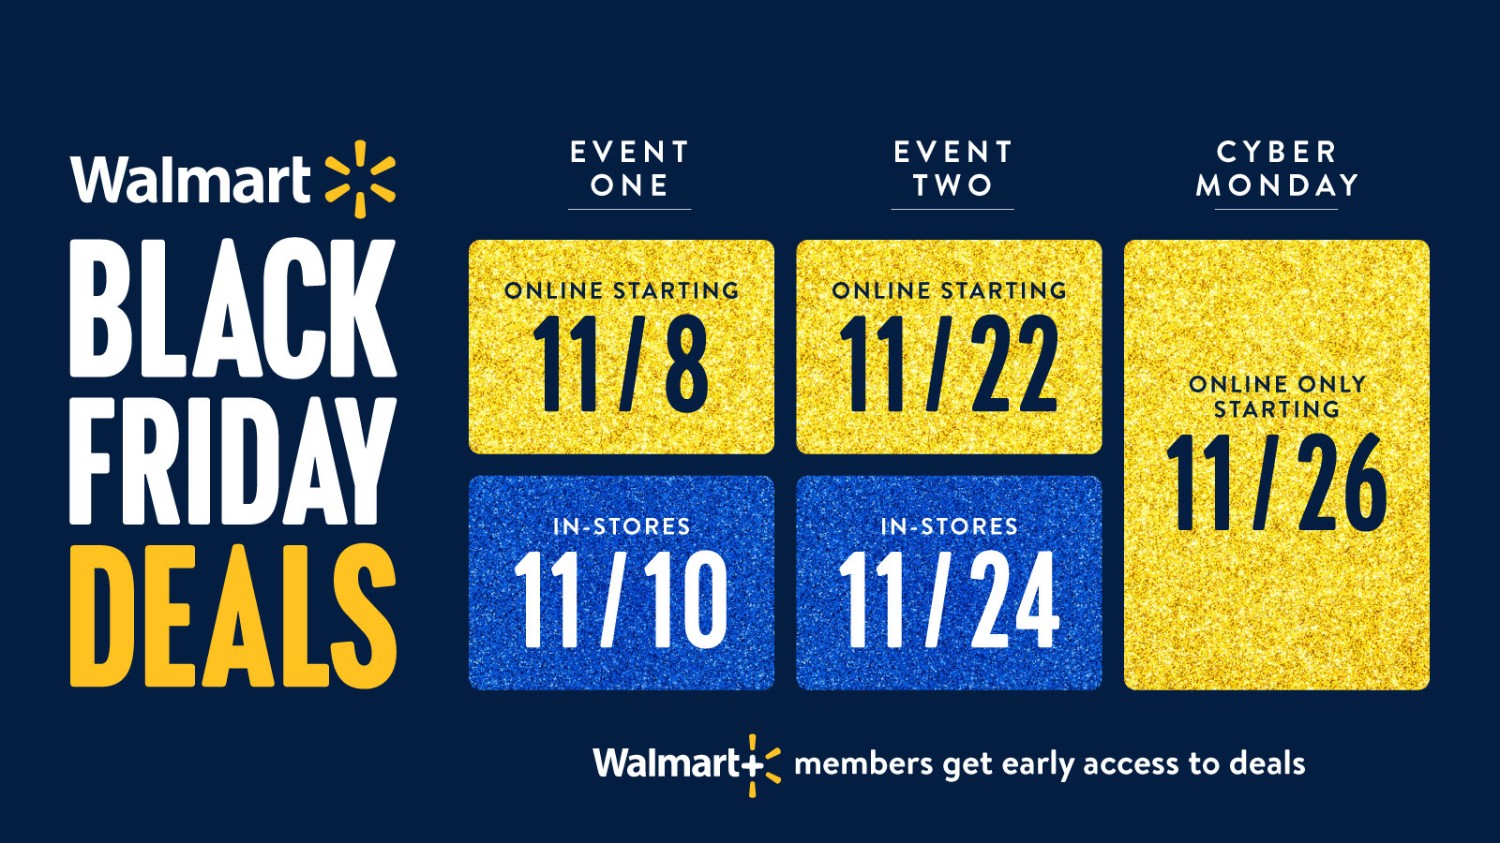 https://corporate.walmart.com/content/corporate/en_us/news/2023/11/01/walmarts-black-friday-deals-are-back-with-major-savings-and-early-access-shopping-for-walmart-plus-members/jcr:content/corpnewspar/image_2_0_734944571.img.jpg/1702321062206.jpg